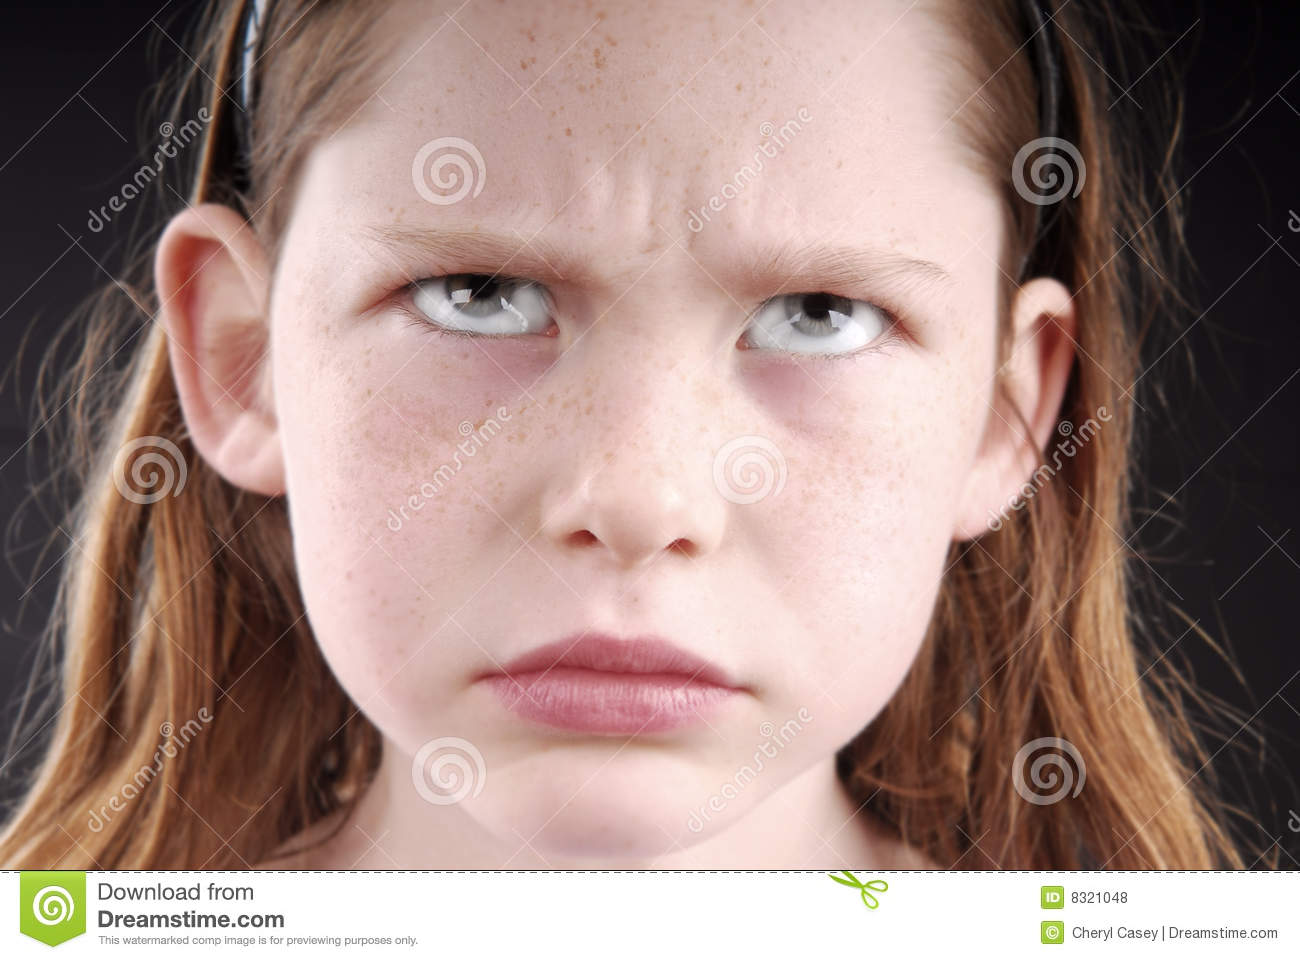 Young Girl Looking Upset Royalty Free Stock Photos   Image  8321048